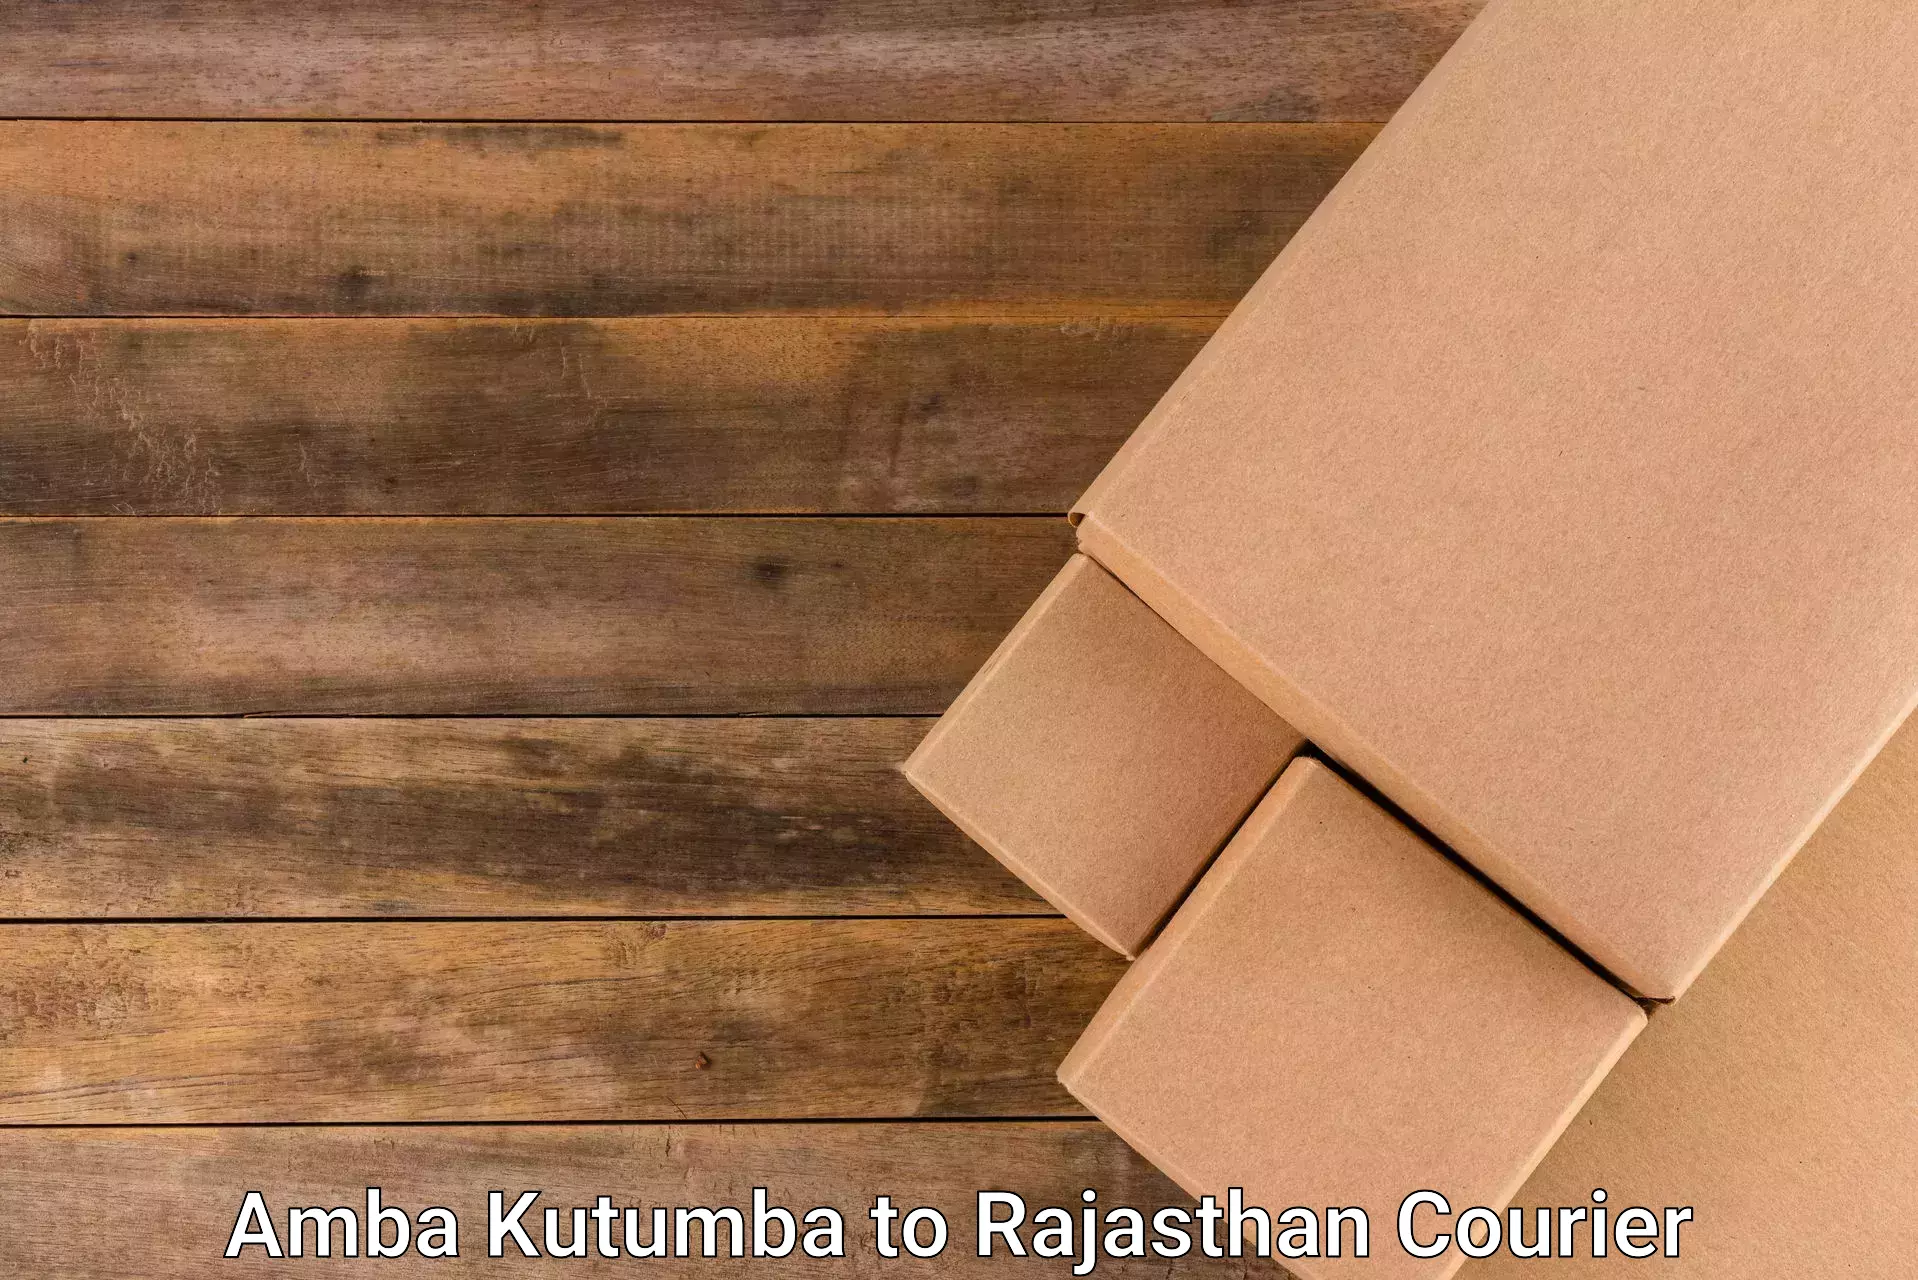 Business delivery service in Amba Kutumba to Rajasthan